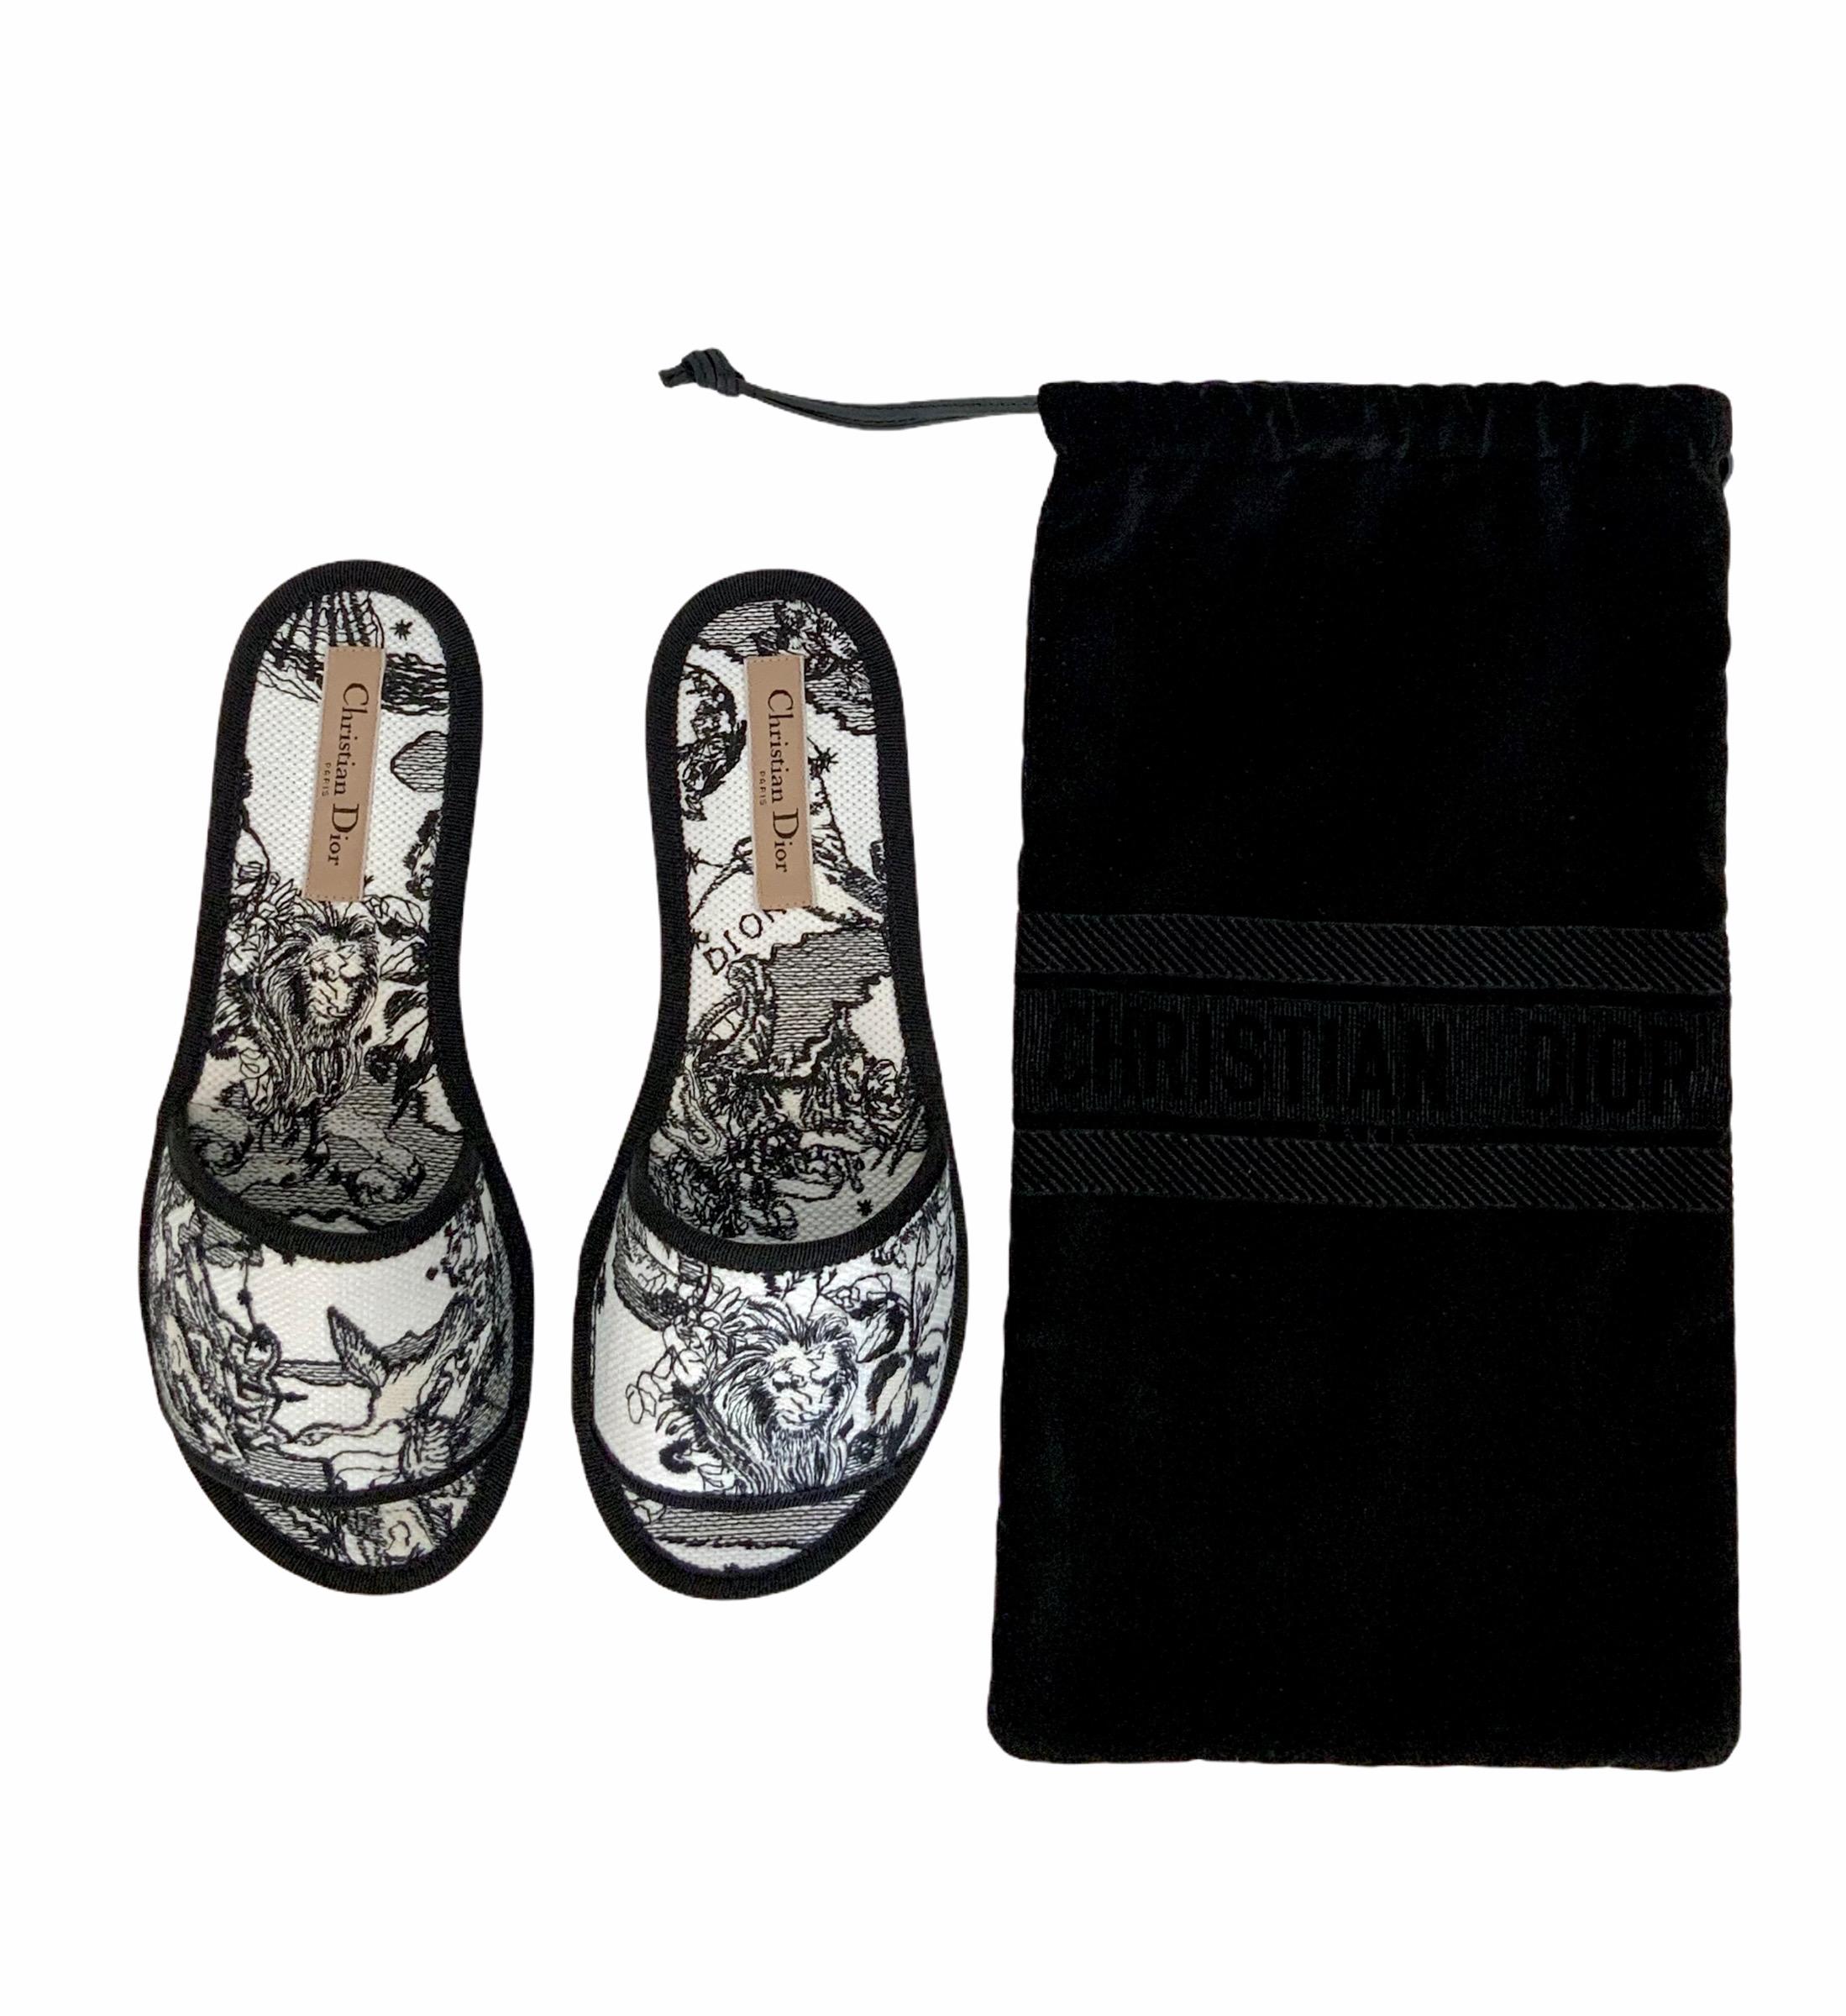 Invitation to refinement and the art of gentle living, the exceptional Dior Chez Moi capsule collection is composed of home wear designed by Maria Grazia Chiuri like these pre-owned but new slides crafted in cotton with the Dior Zodiac motif. Mr